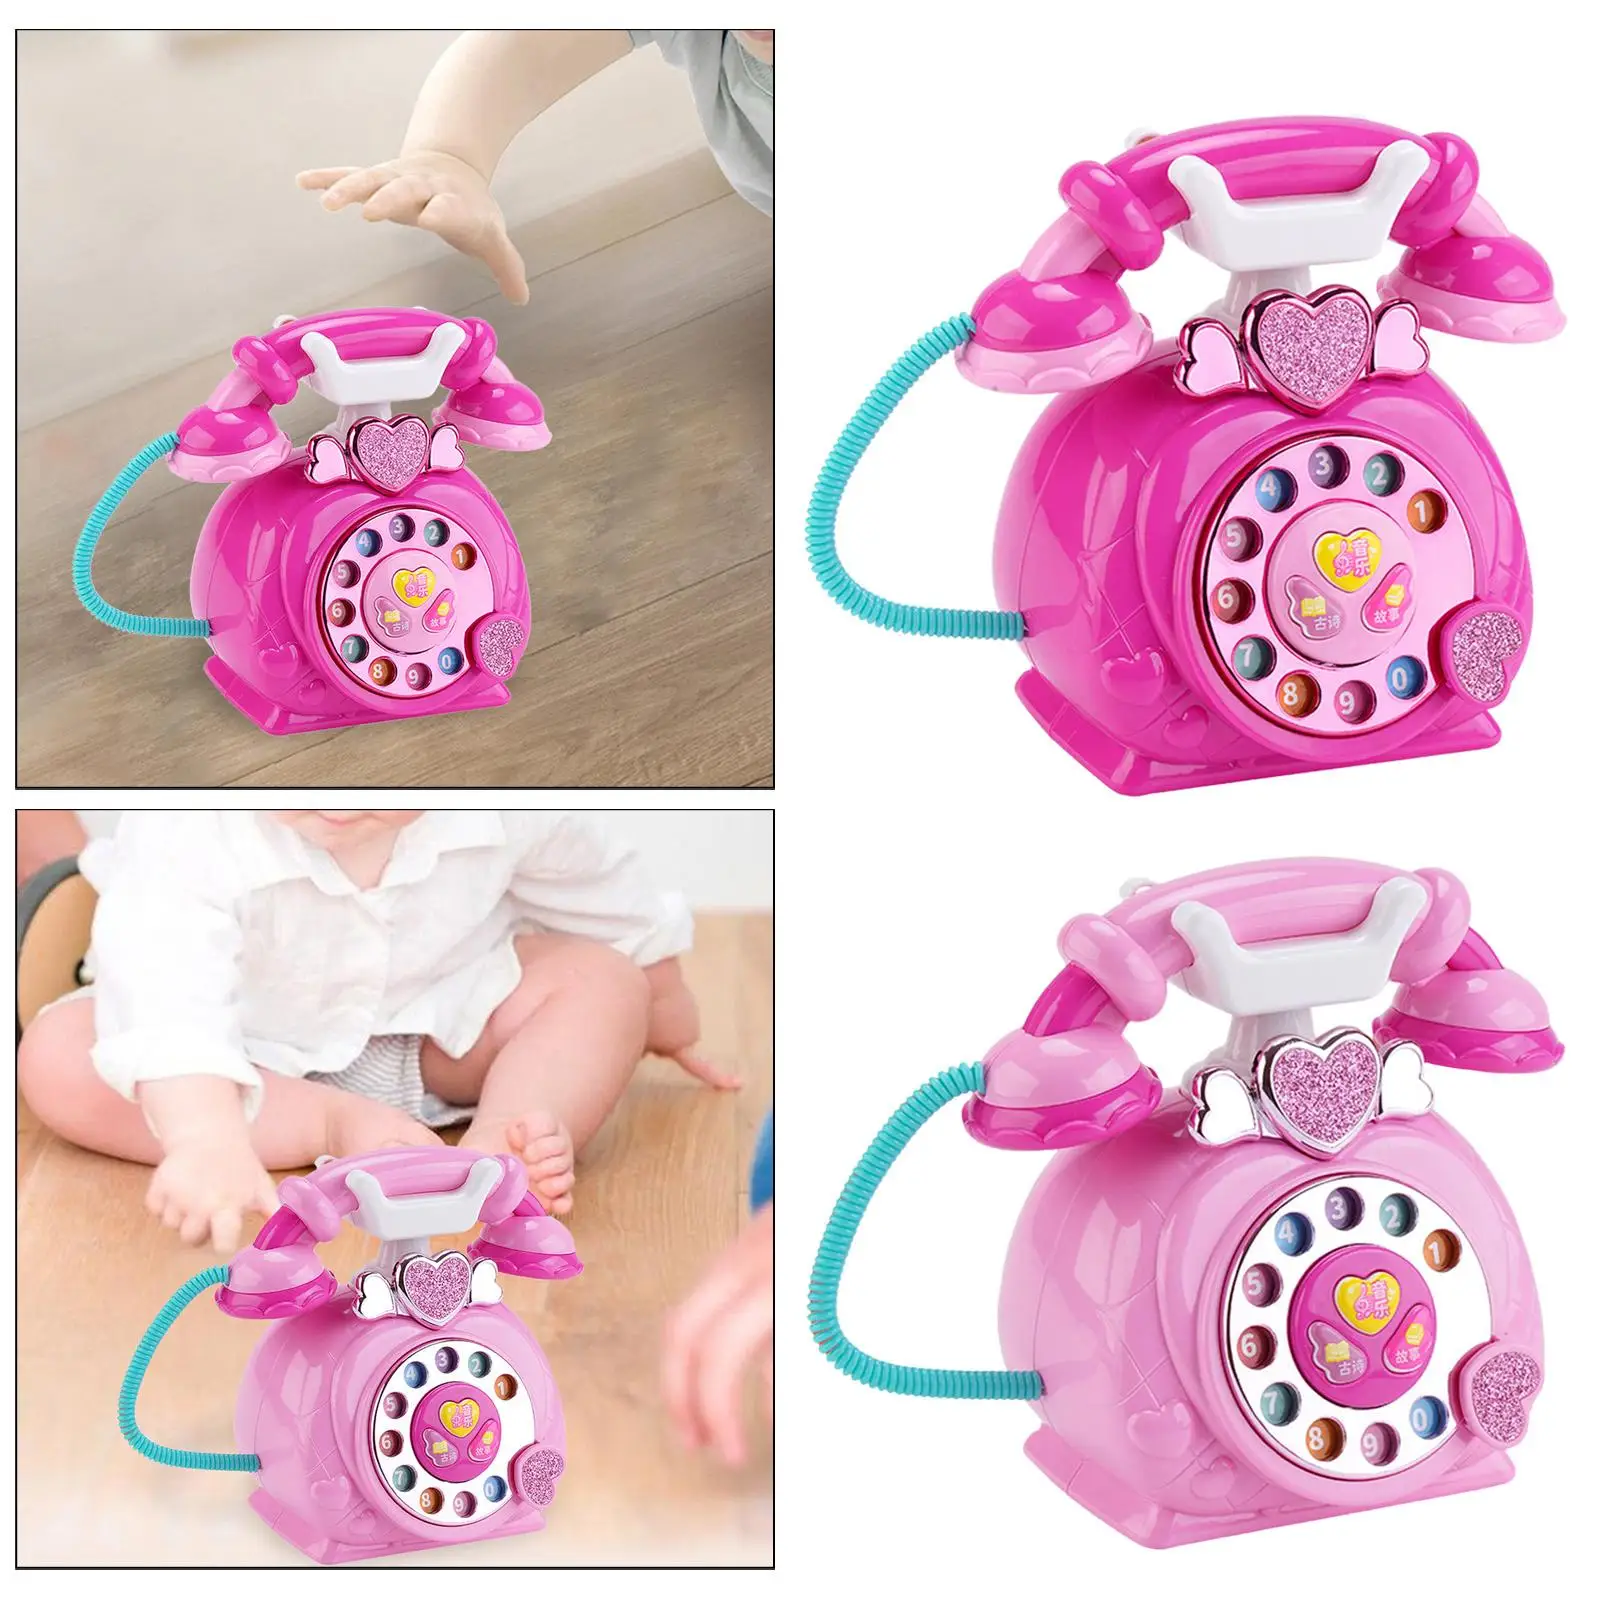 Telephone Toy Storytelling Machine Educational with Music Toy for Kids